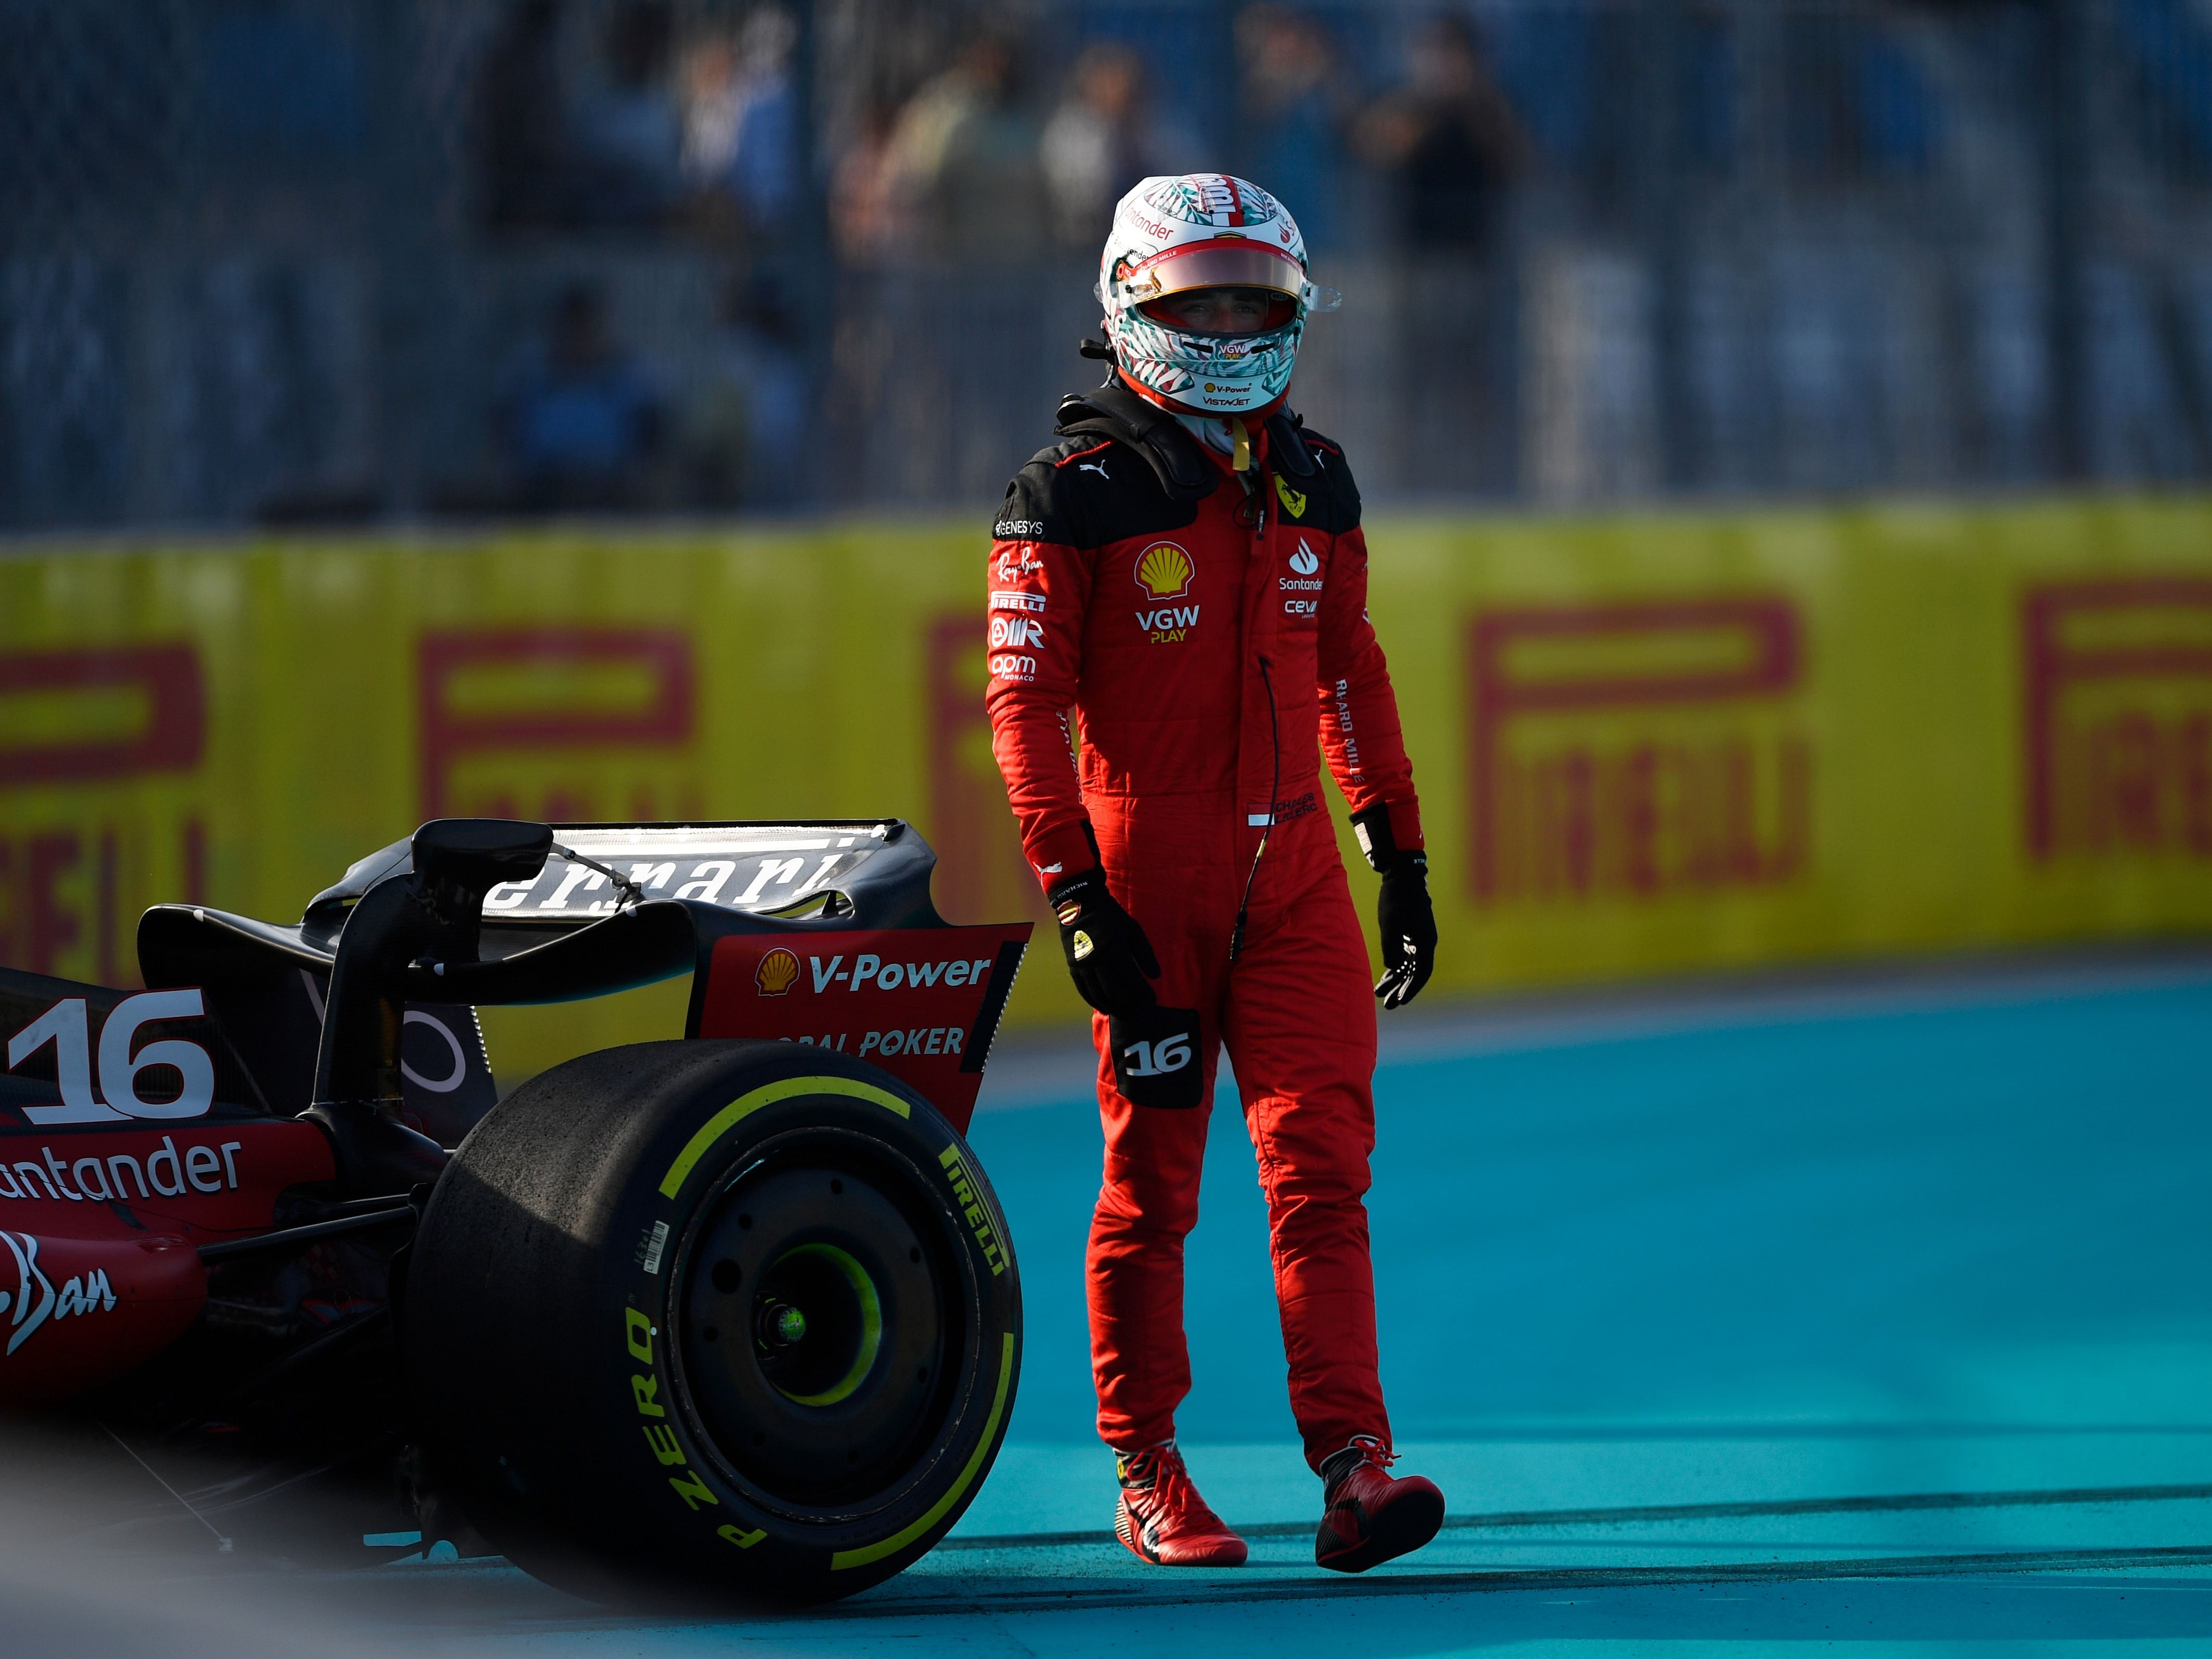 Charles Leclerc walks from his car after crashing during practice ahead of the 2023 F1 Miami Grand Prix. (Photo by Rudy Carezzevoli/Getty Images)